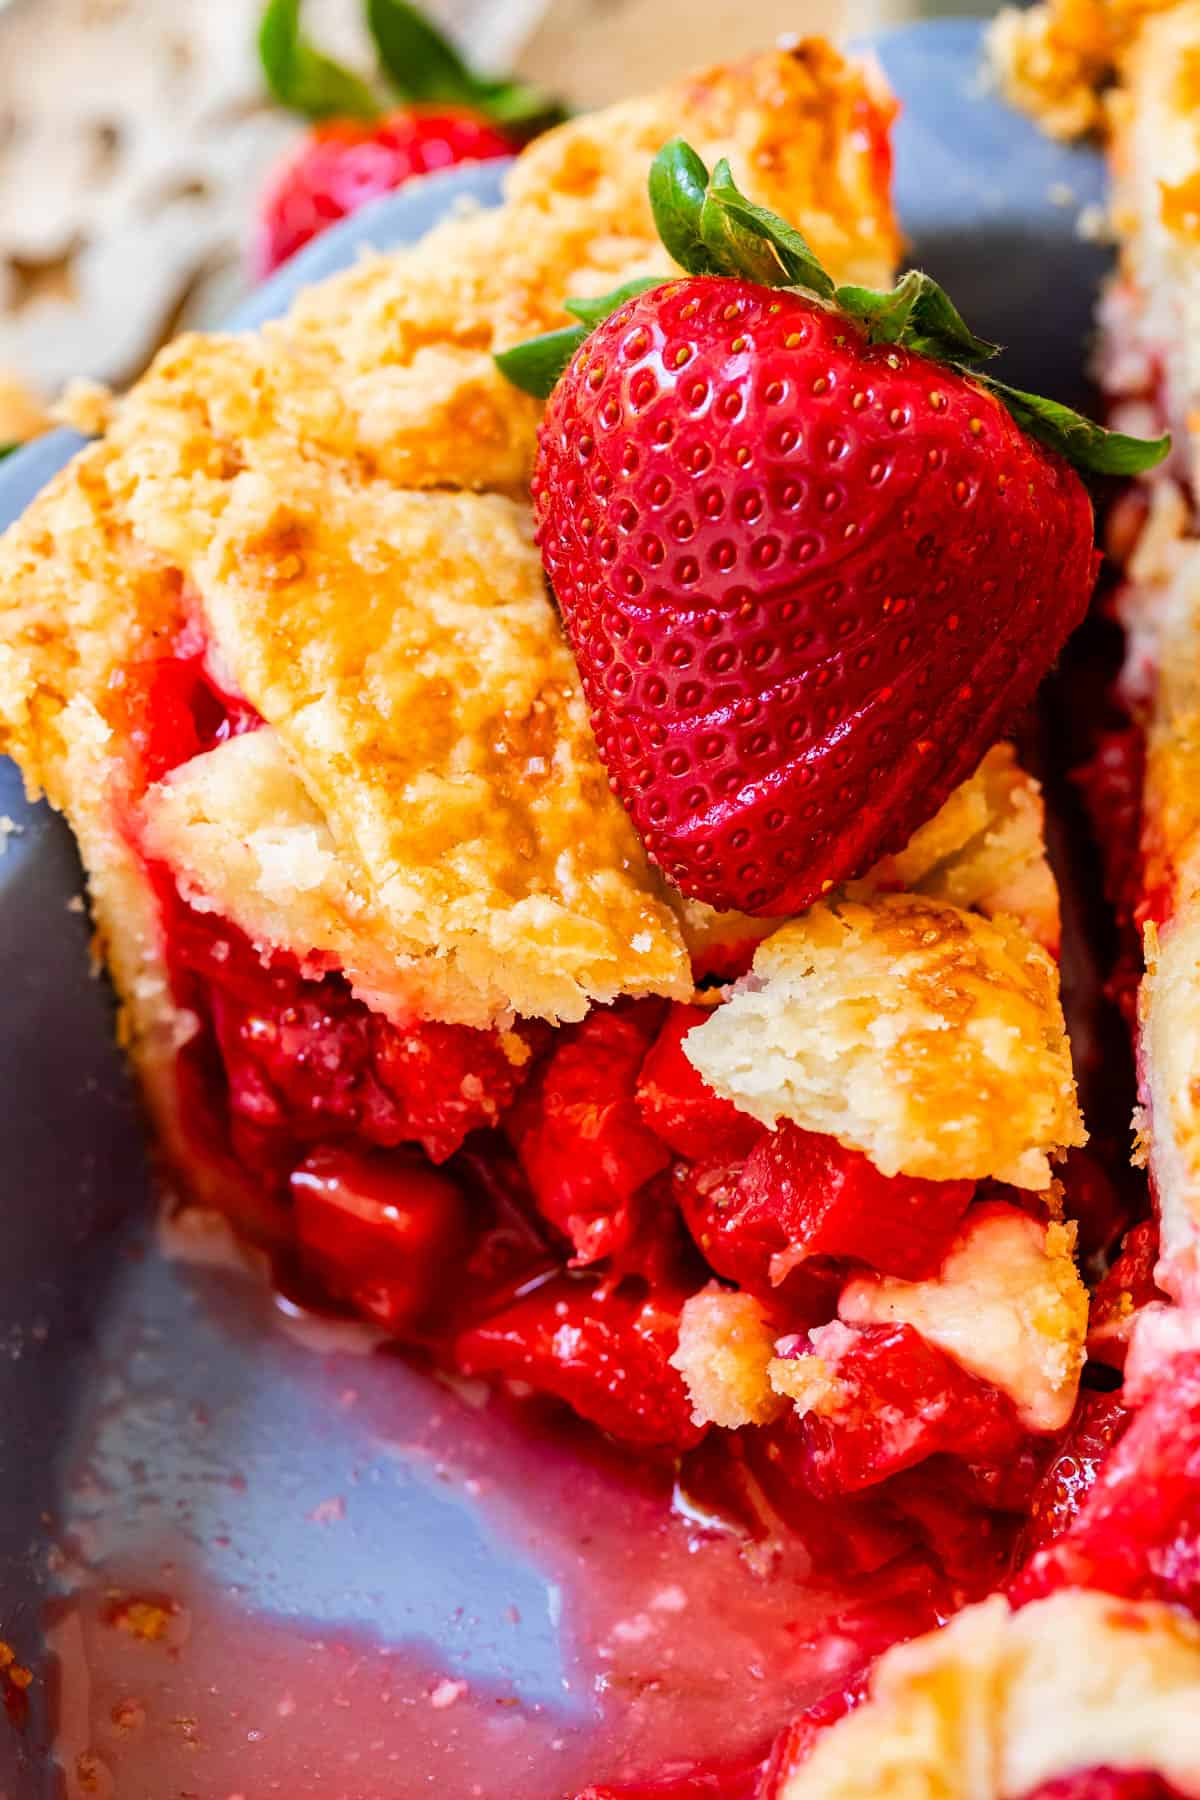 piece of lattice crust strawberry and rhubarb pie with lots of filling and fresh strawberry garnish.